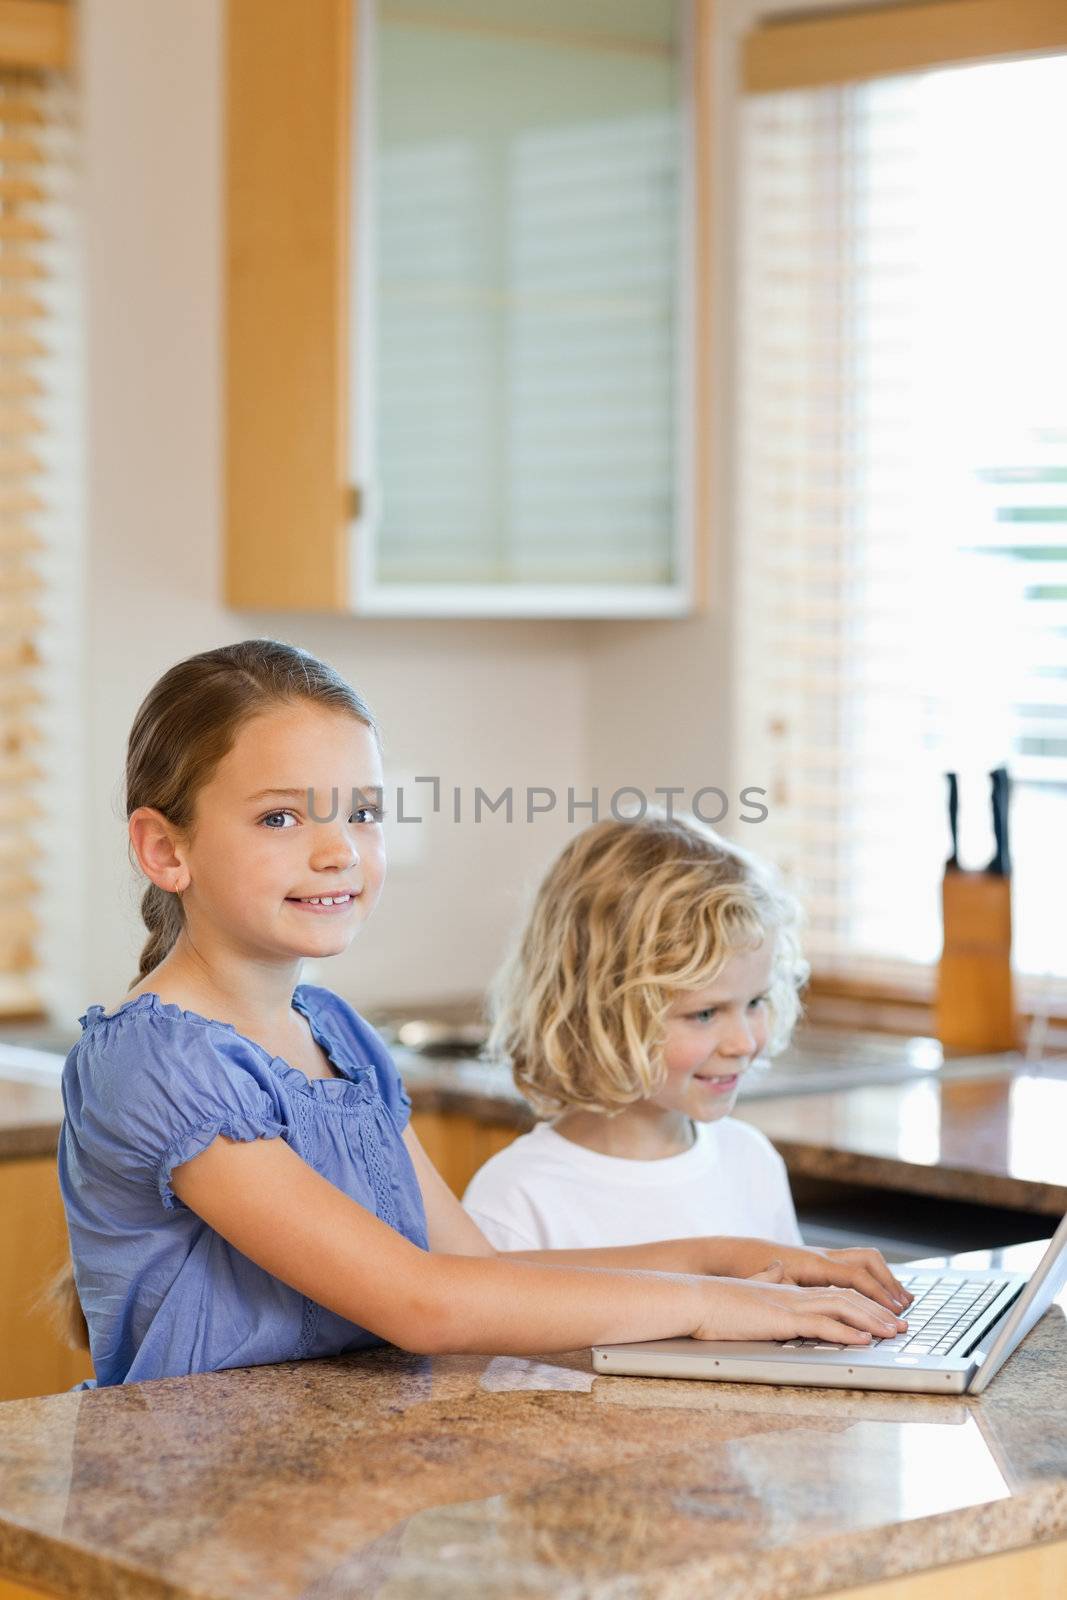 Brother and sister together with laptop in the kitchen